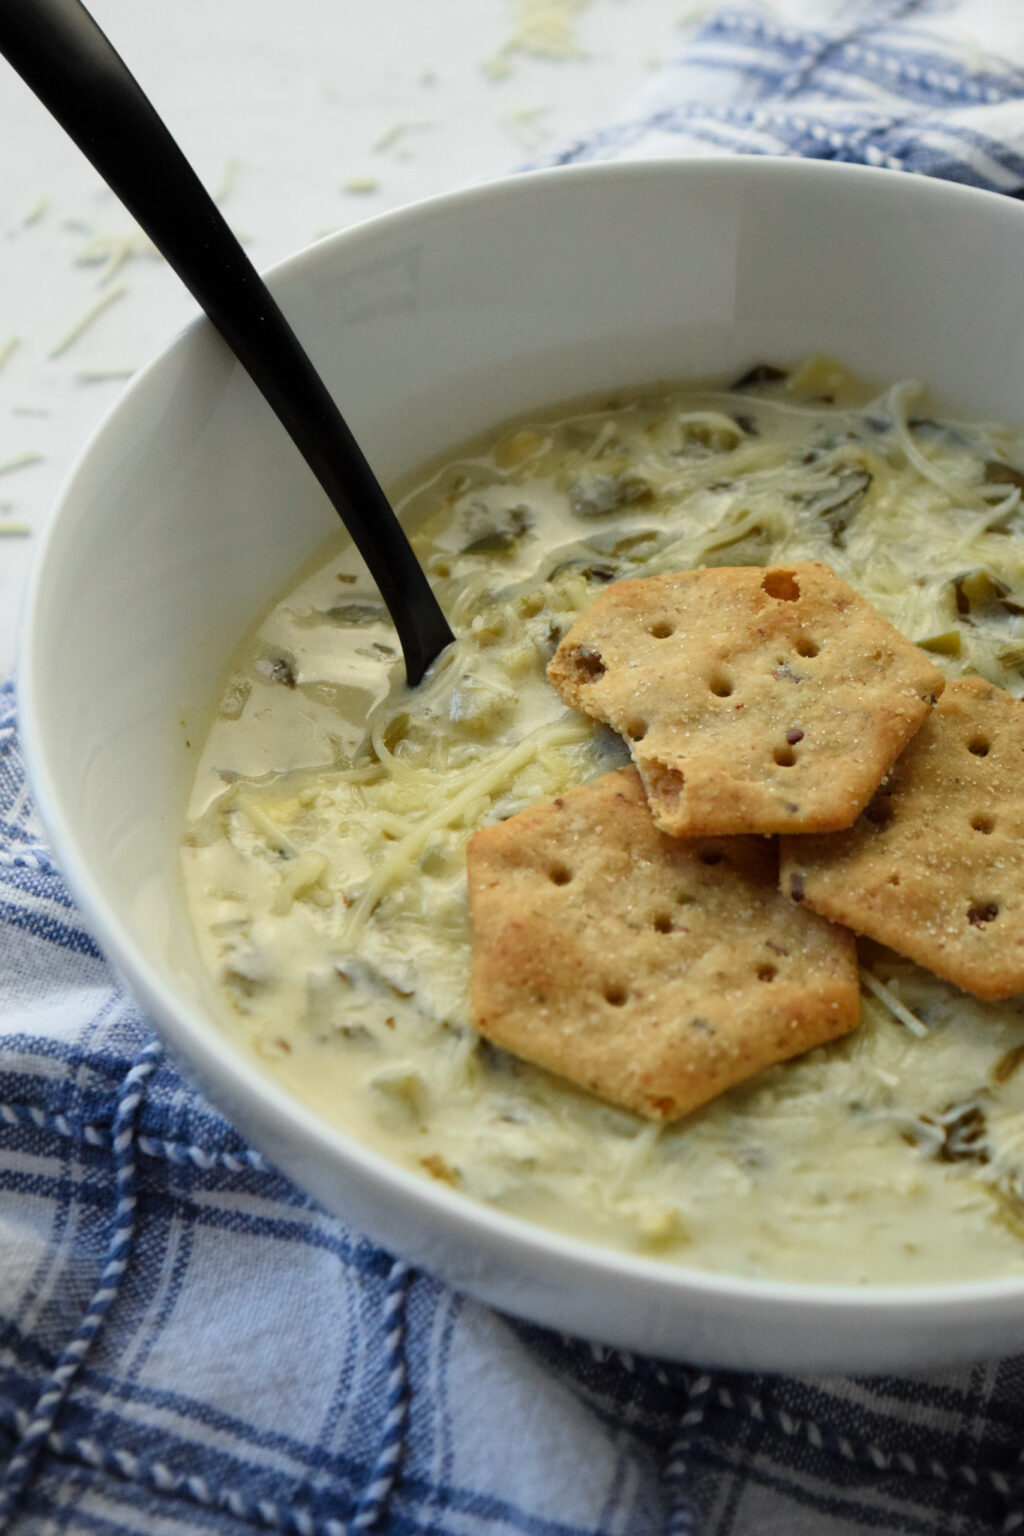 Creamy Spinach Artichoke Soup with Gluten Free Crackers